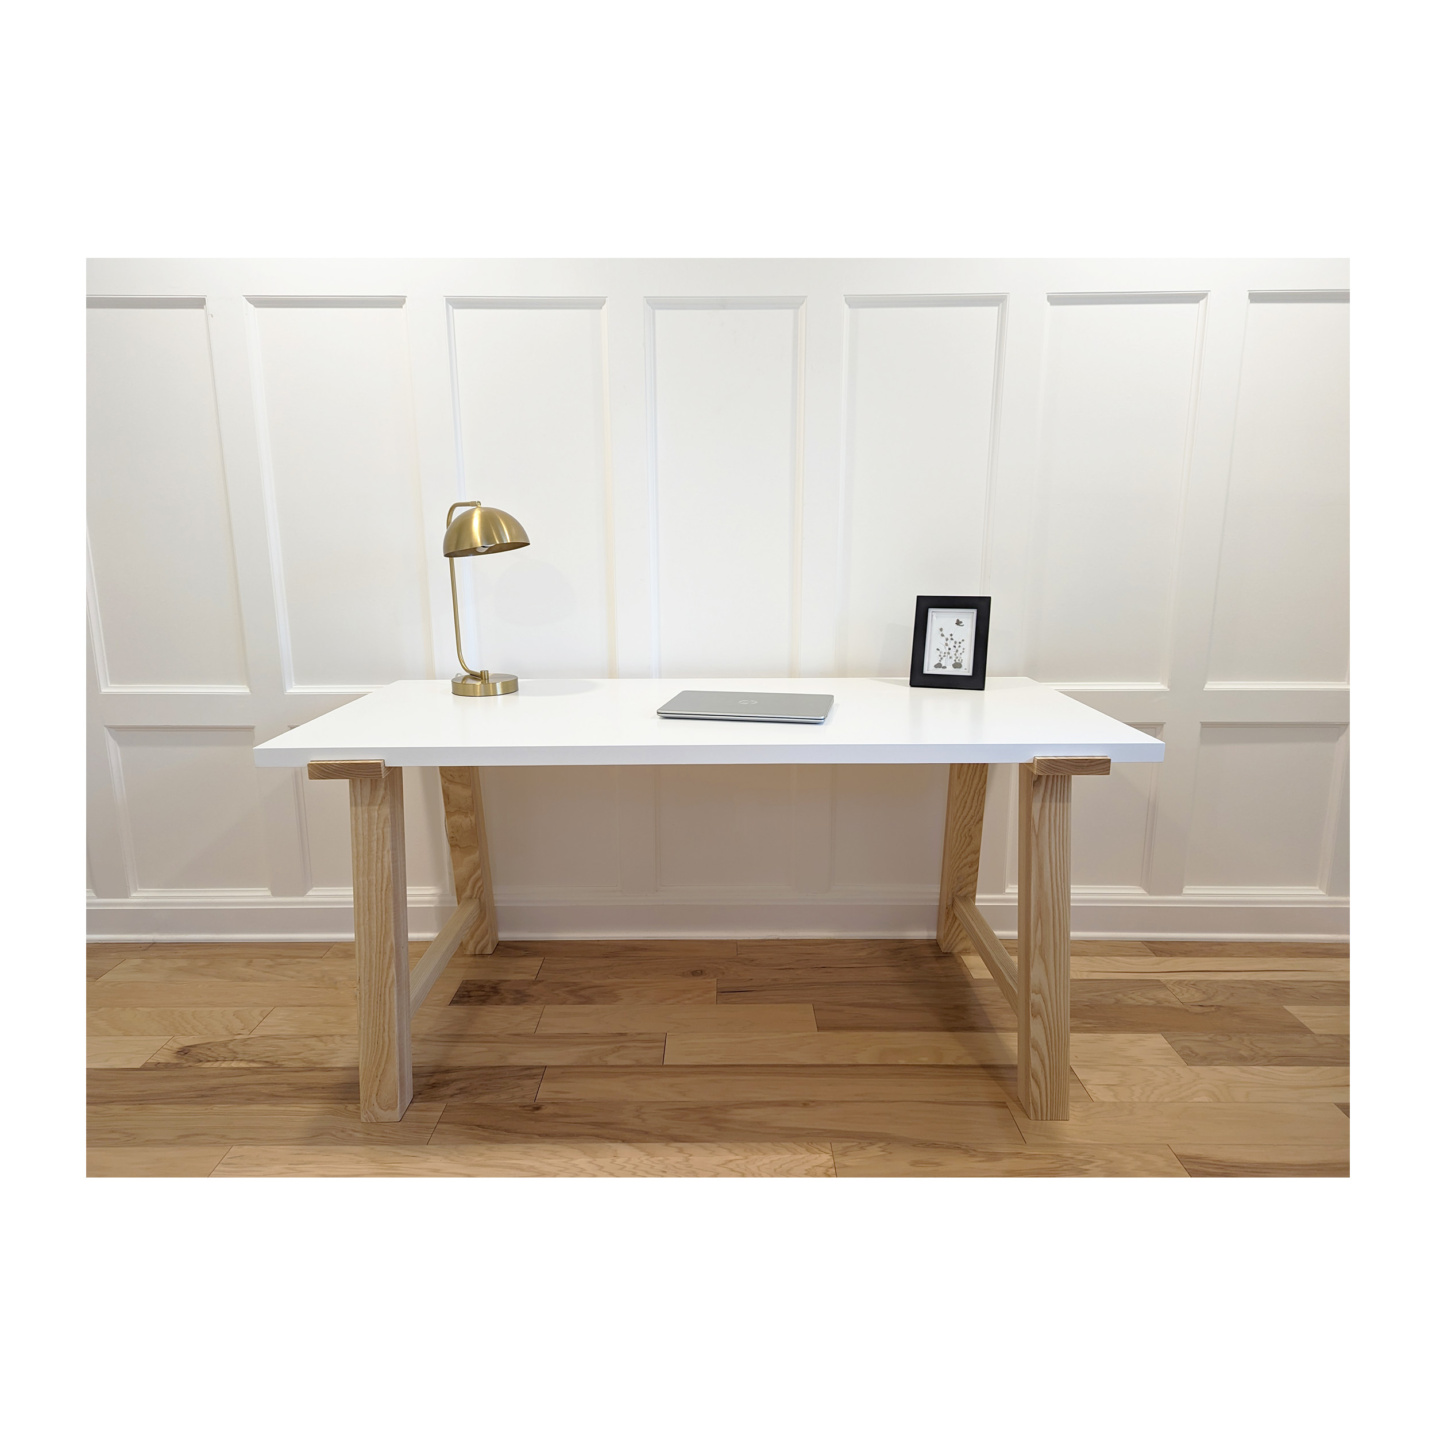 White Top Desk--modern design with angled legs